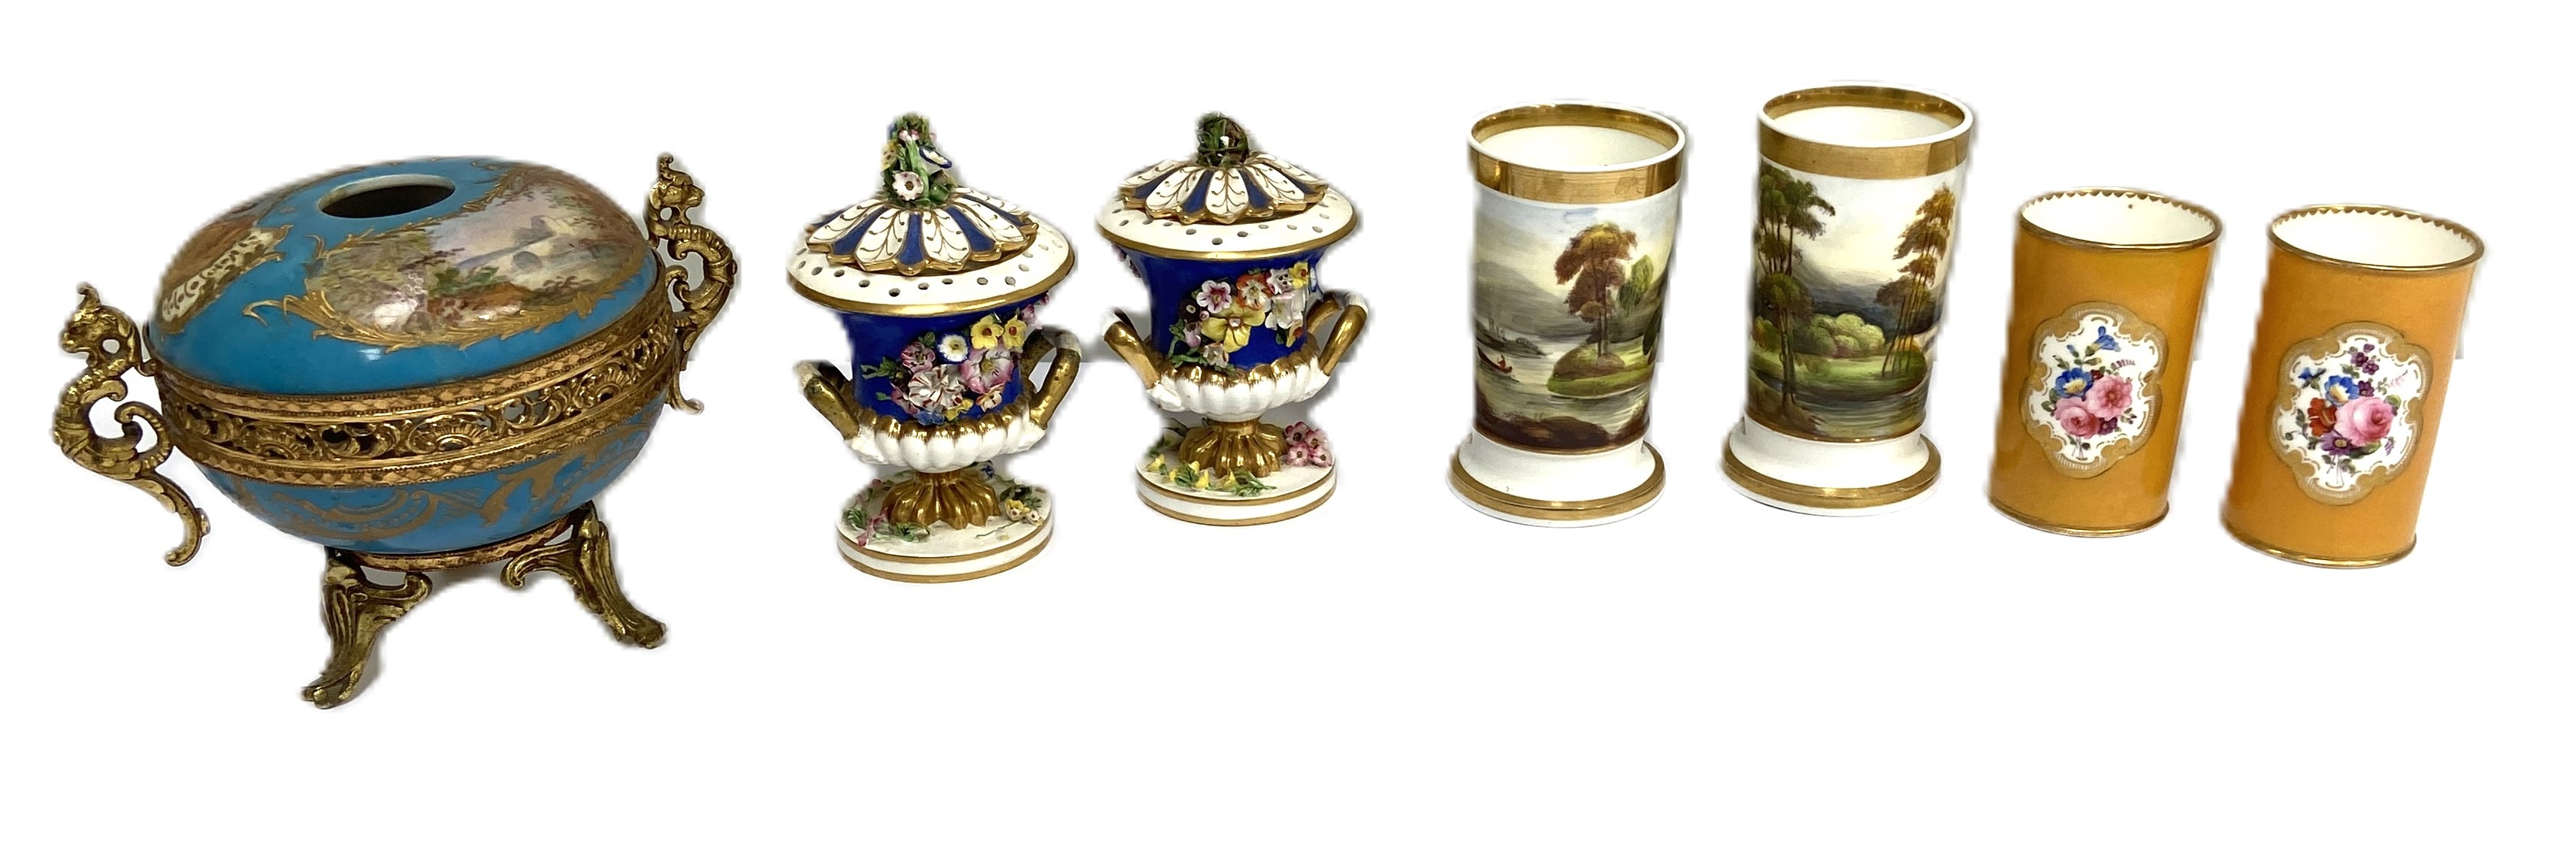 A pair of Staffordshire bone china spill vases, 19th century, decorated with country views, 12cm